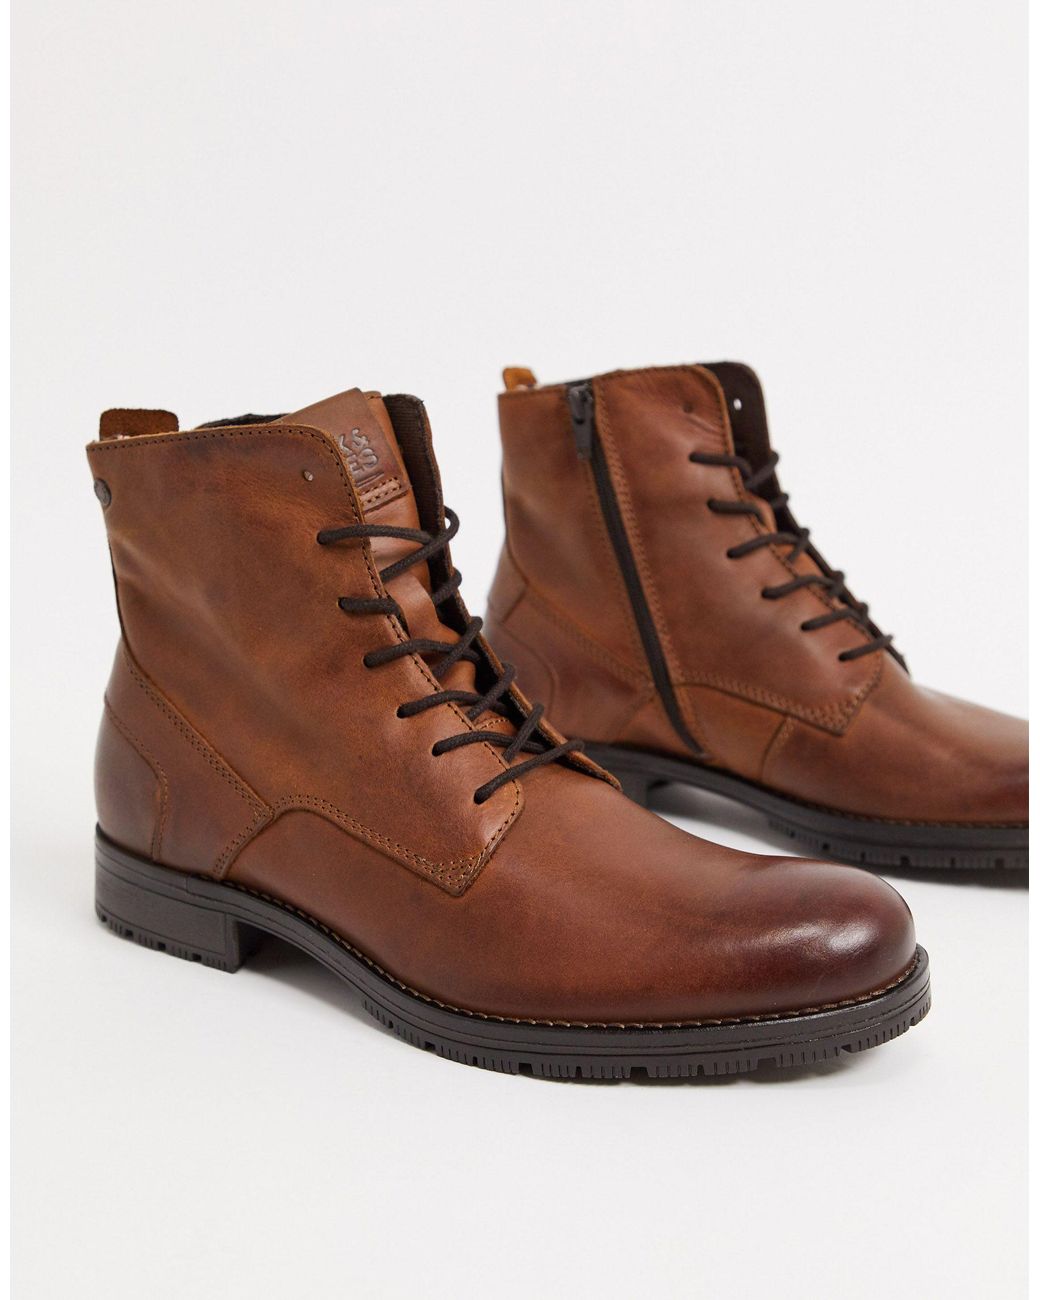 Jack & Jones Leather Lace Up Boot in Brown for Men - Lyst